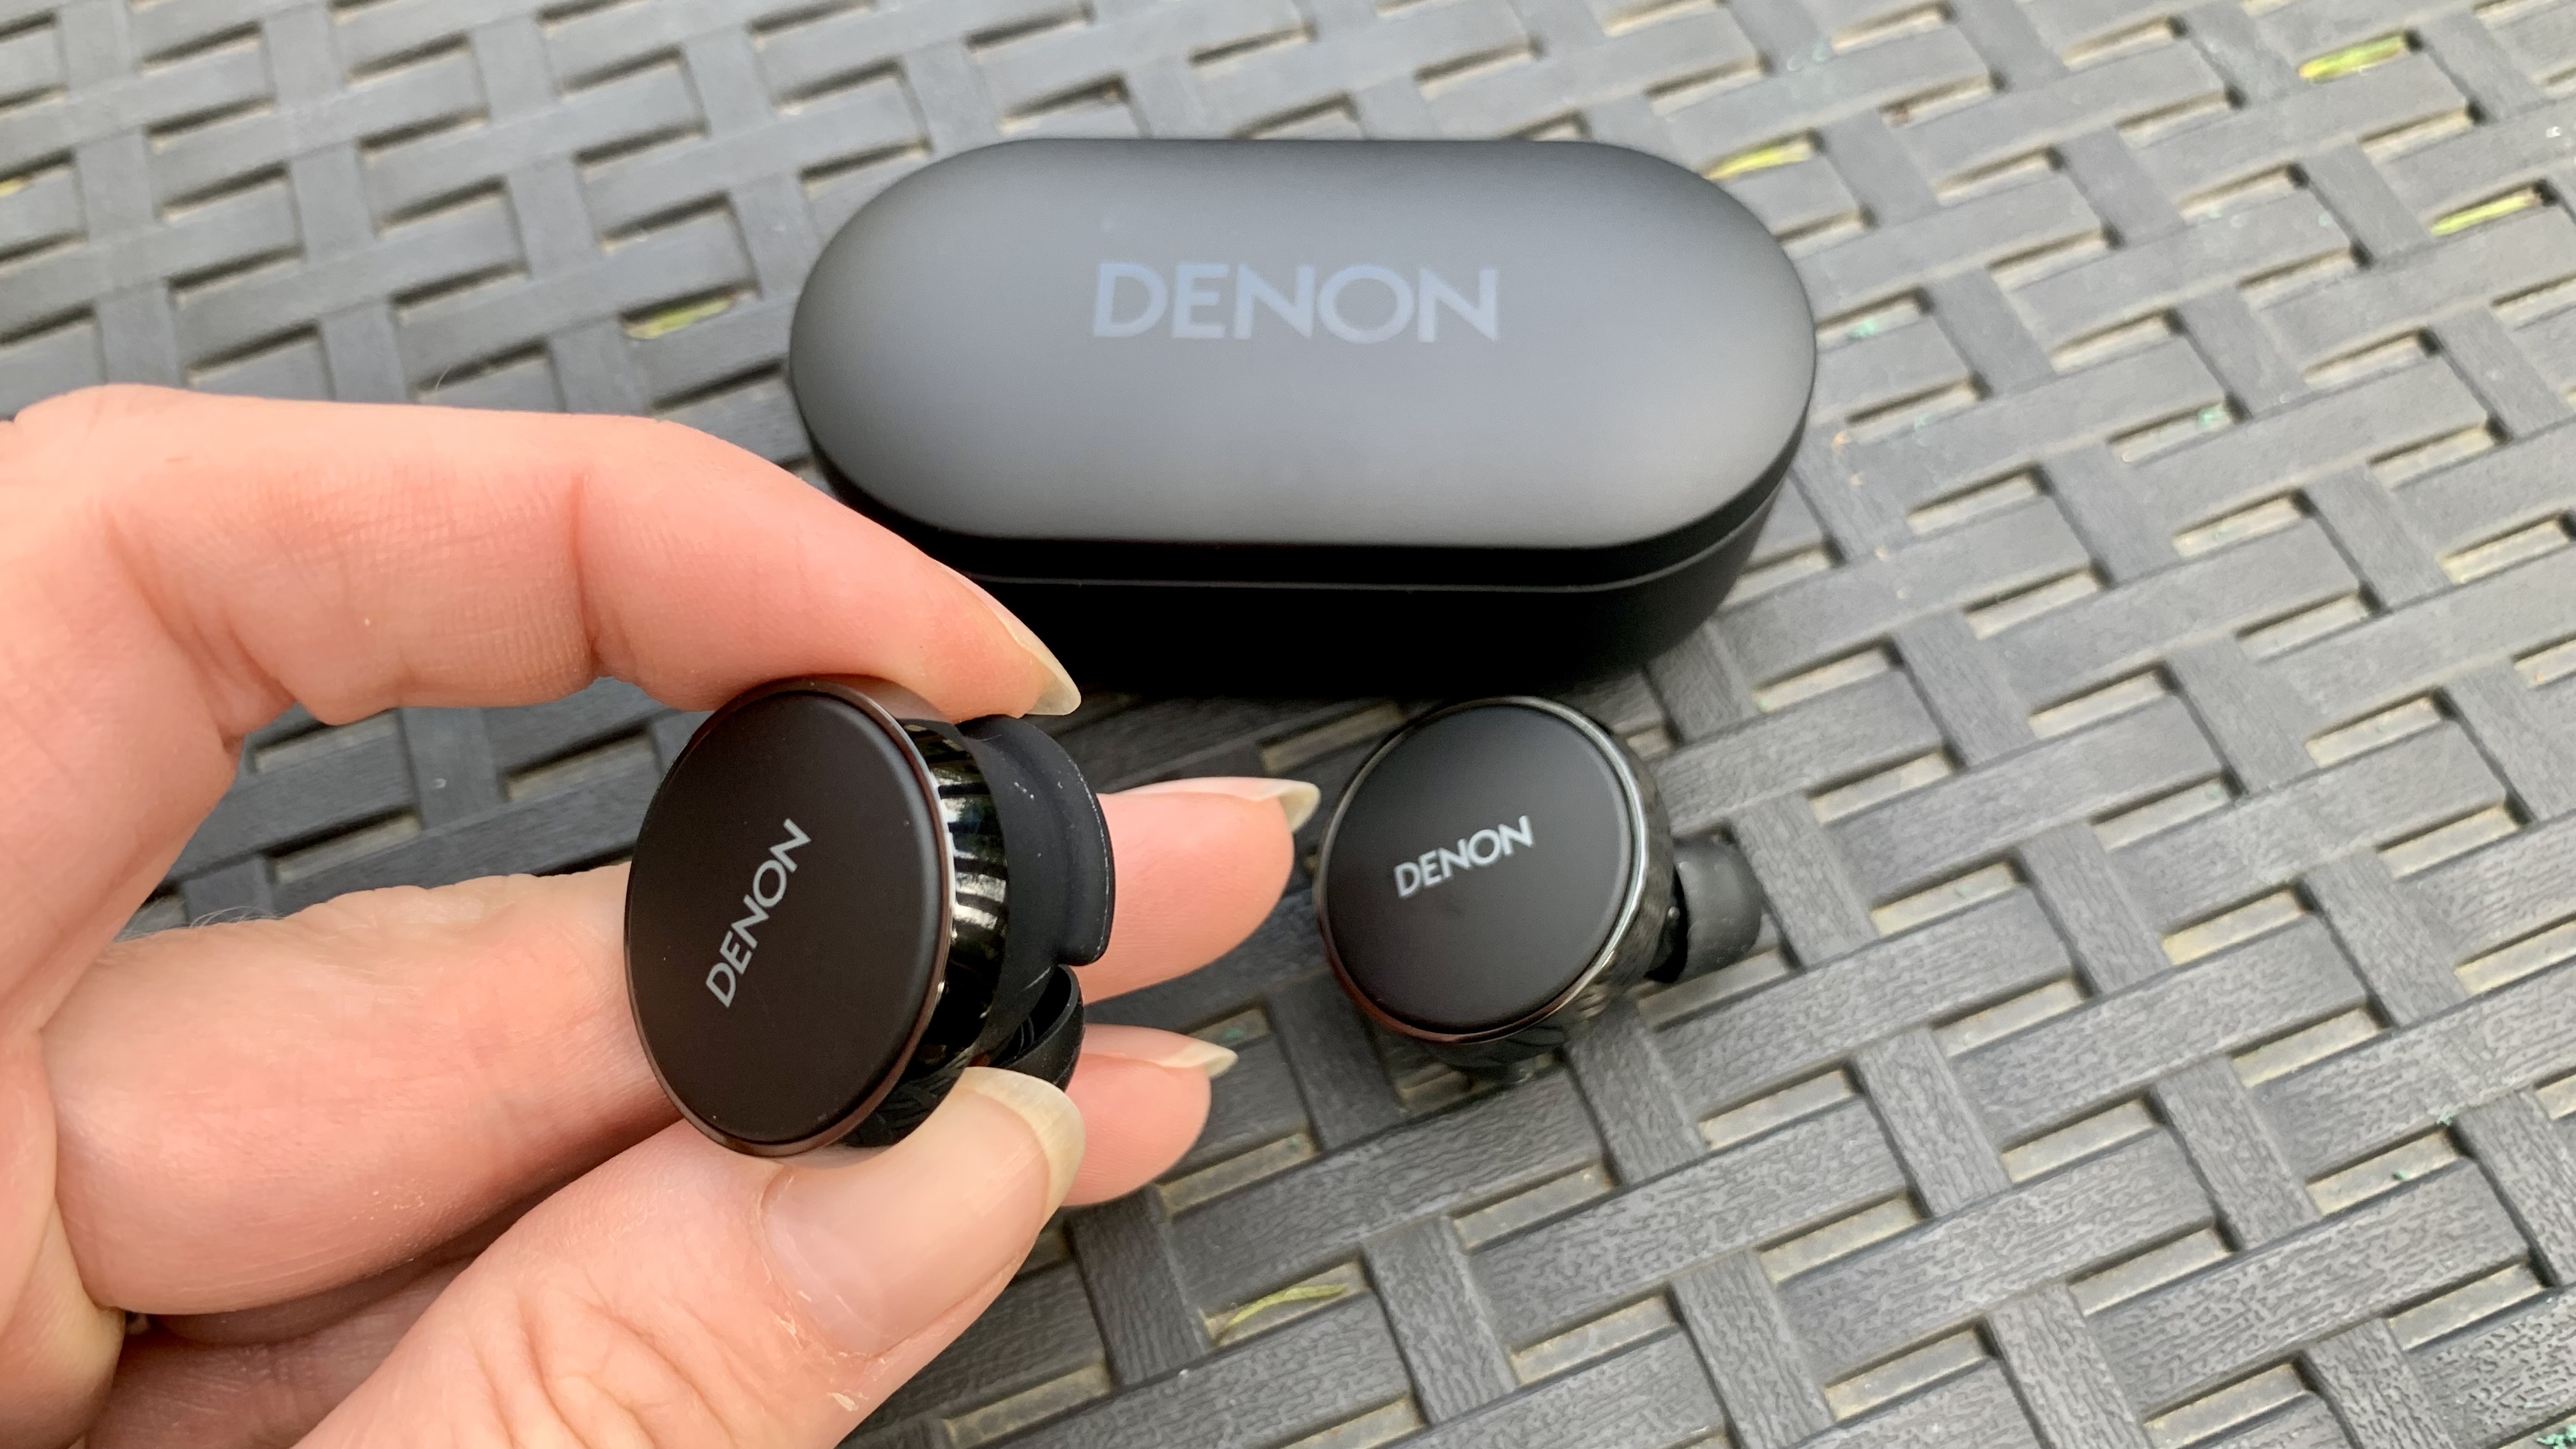 Denon PerL Pro earbud held in a hand, with the case in the background on a black table